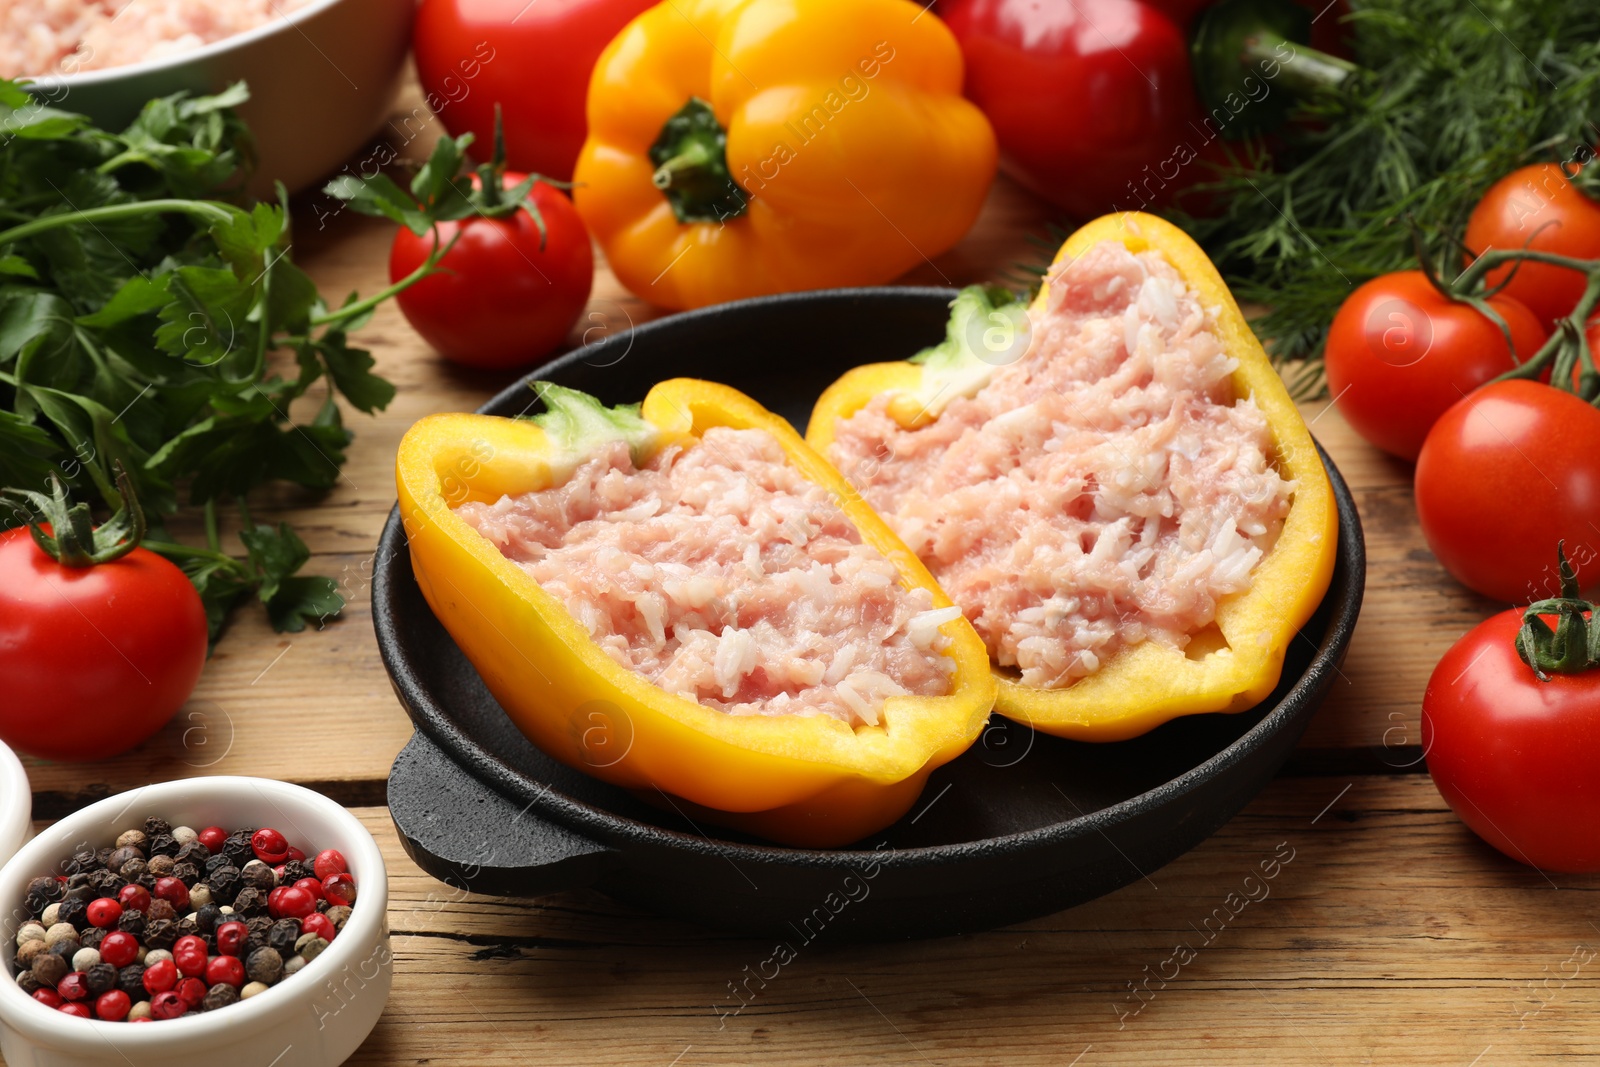 Photo of Raw stuffed peppers with ground meat and ingredients on wooden table